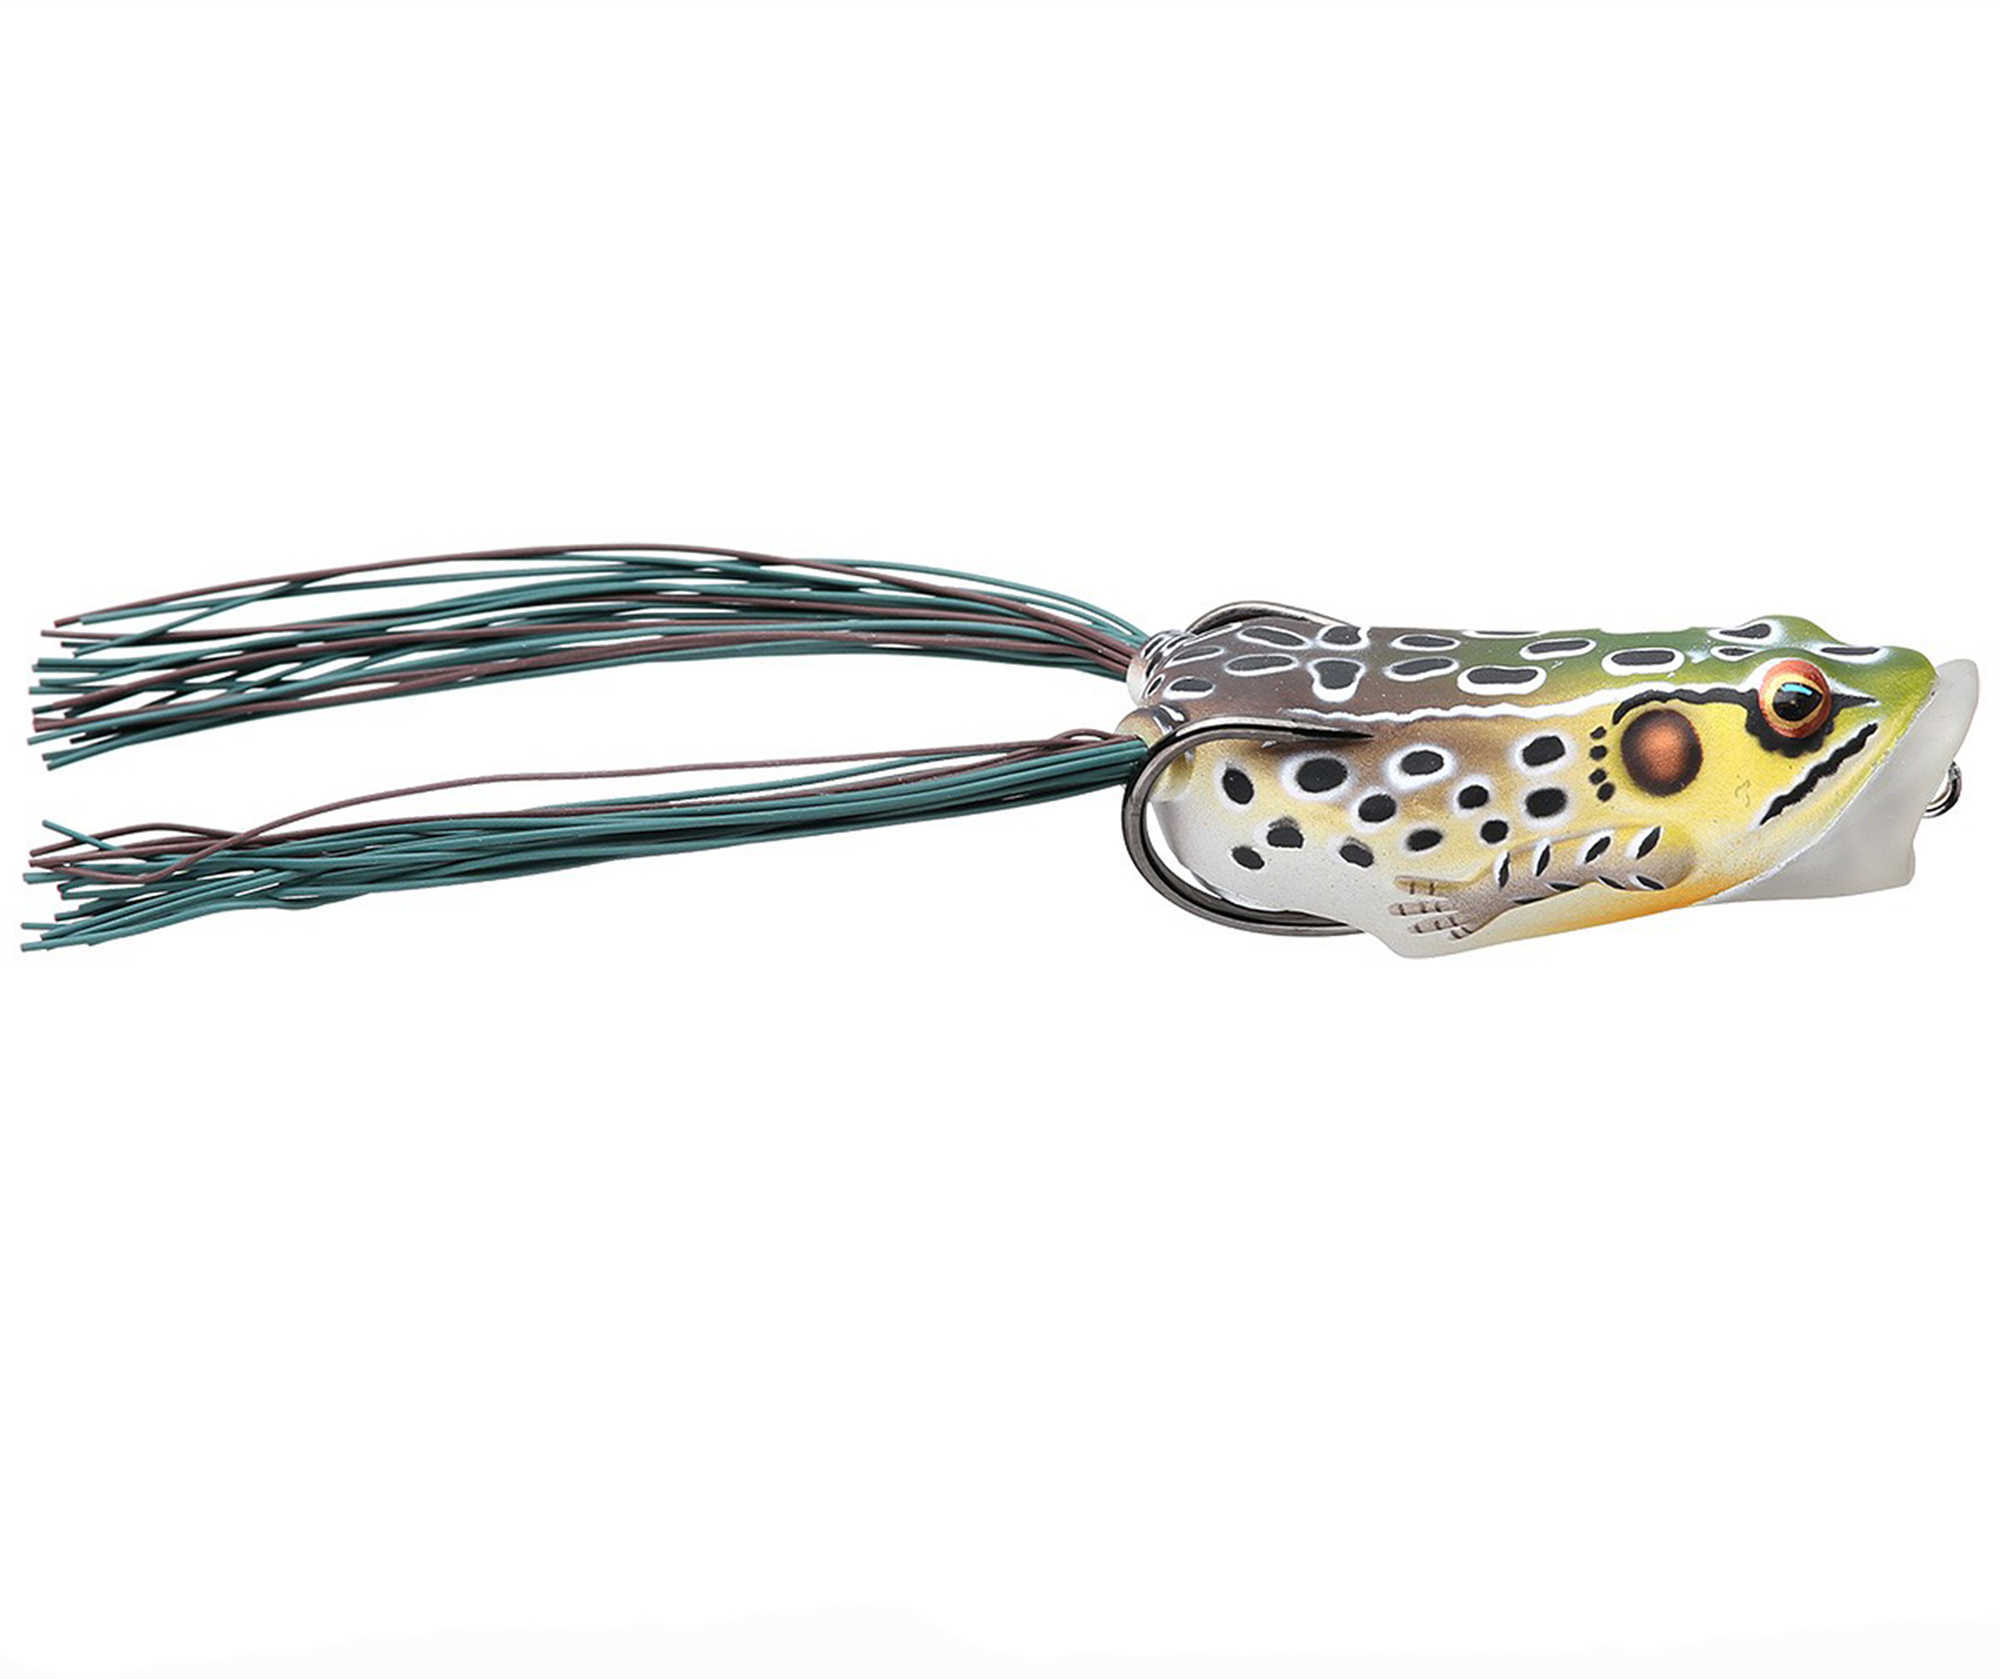 LiveTarget Lures Frog Body Hollow Body Popper Bait Freshwater, 2 1/2" Length, 1/2 oz Weight, Emerald/Brown, Per 1 Md: FH